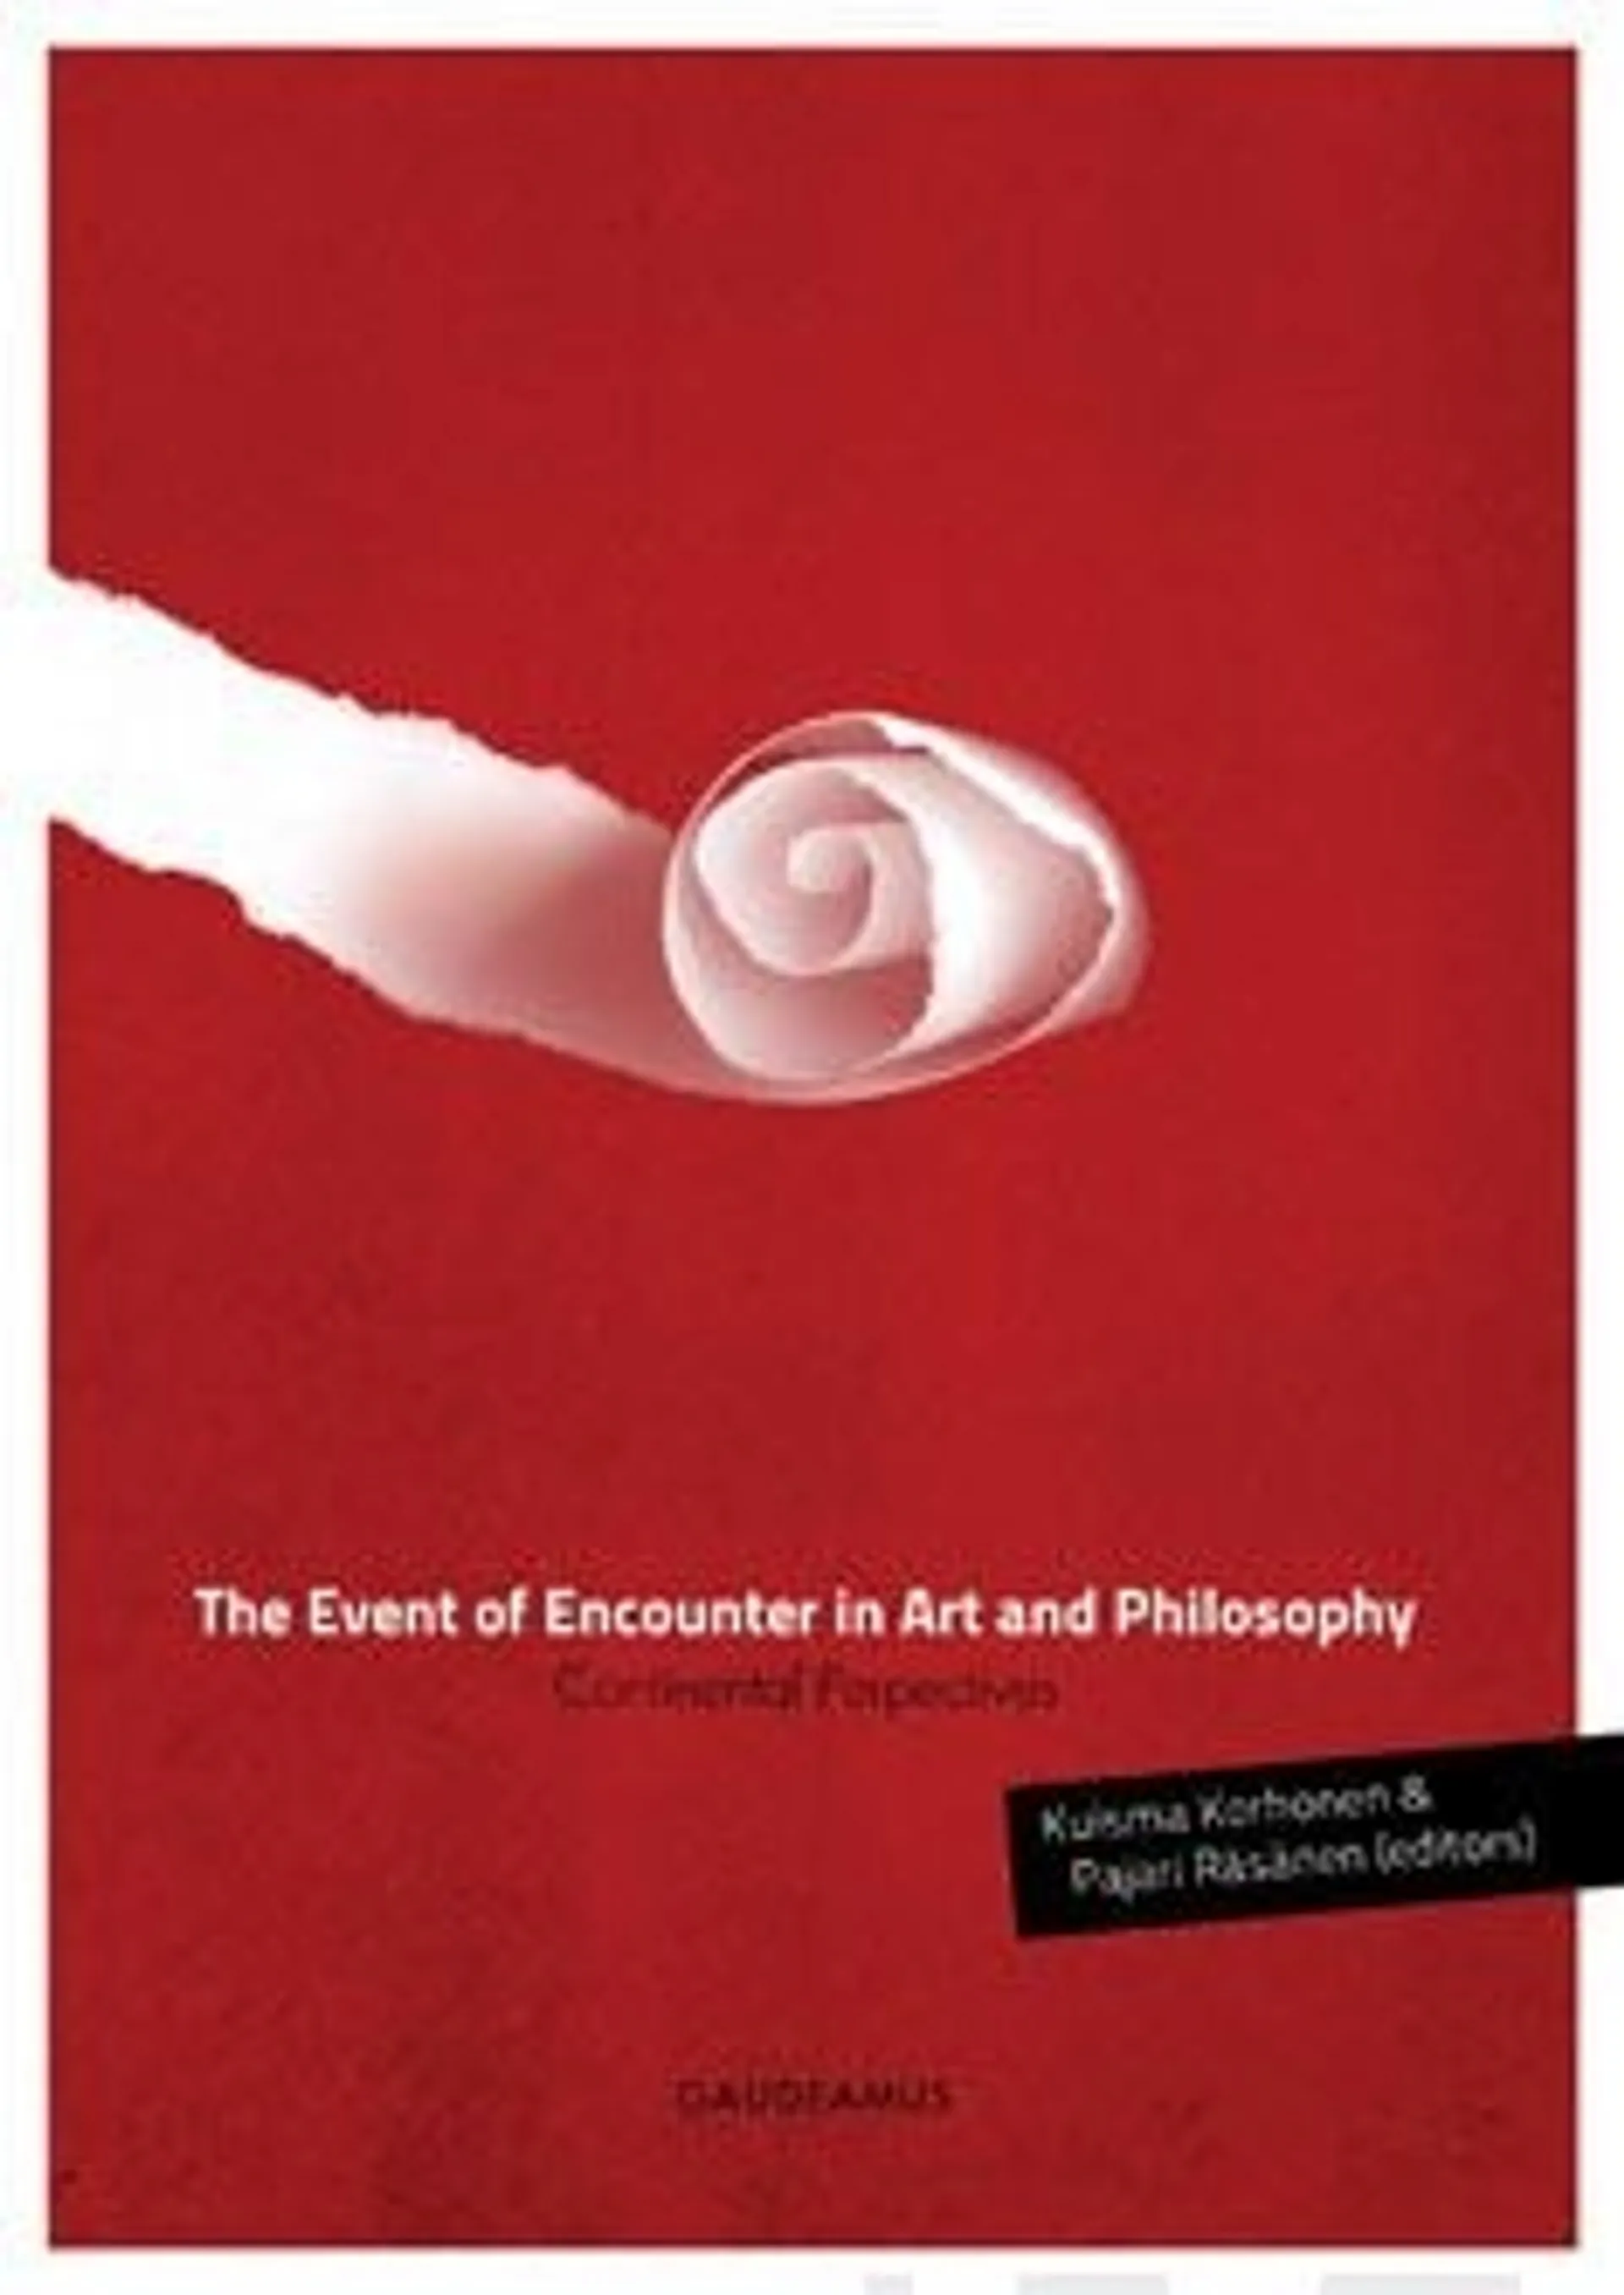 The Event of Encounter in Art and Philosophy